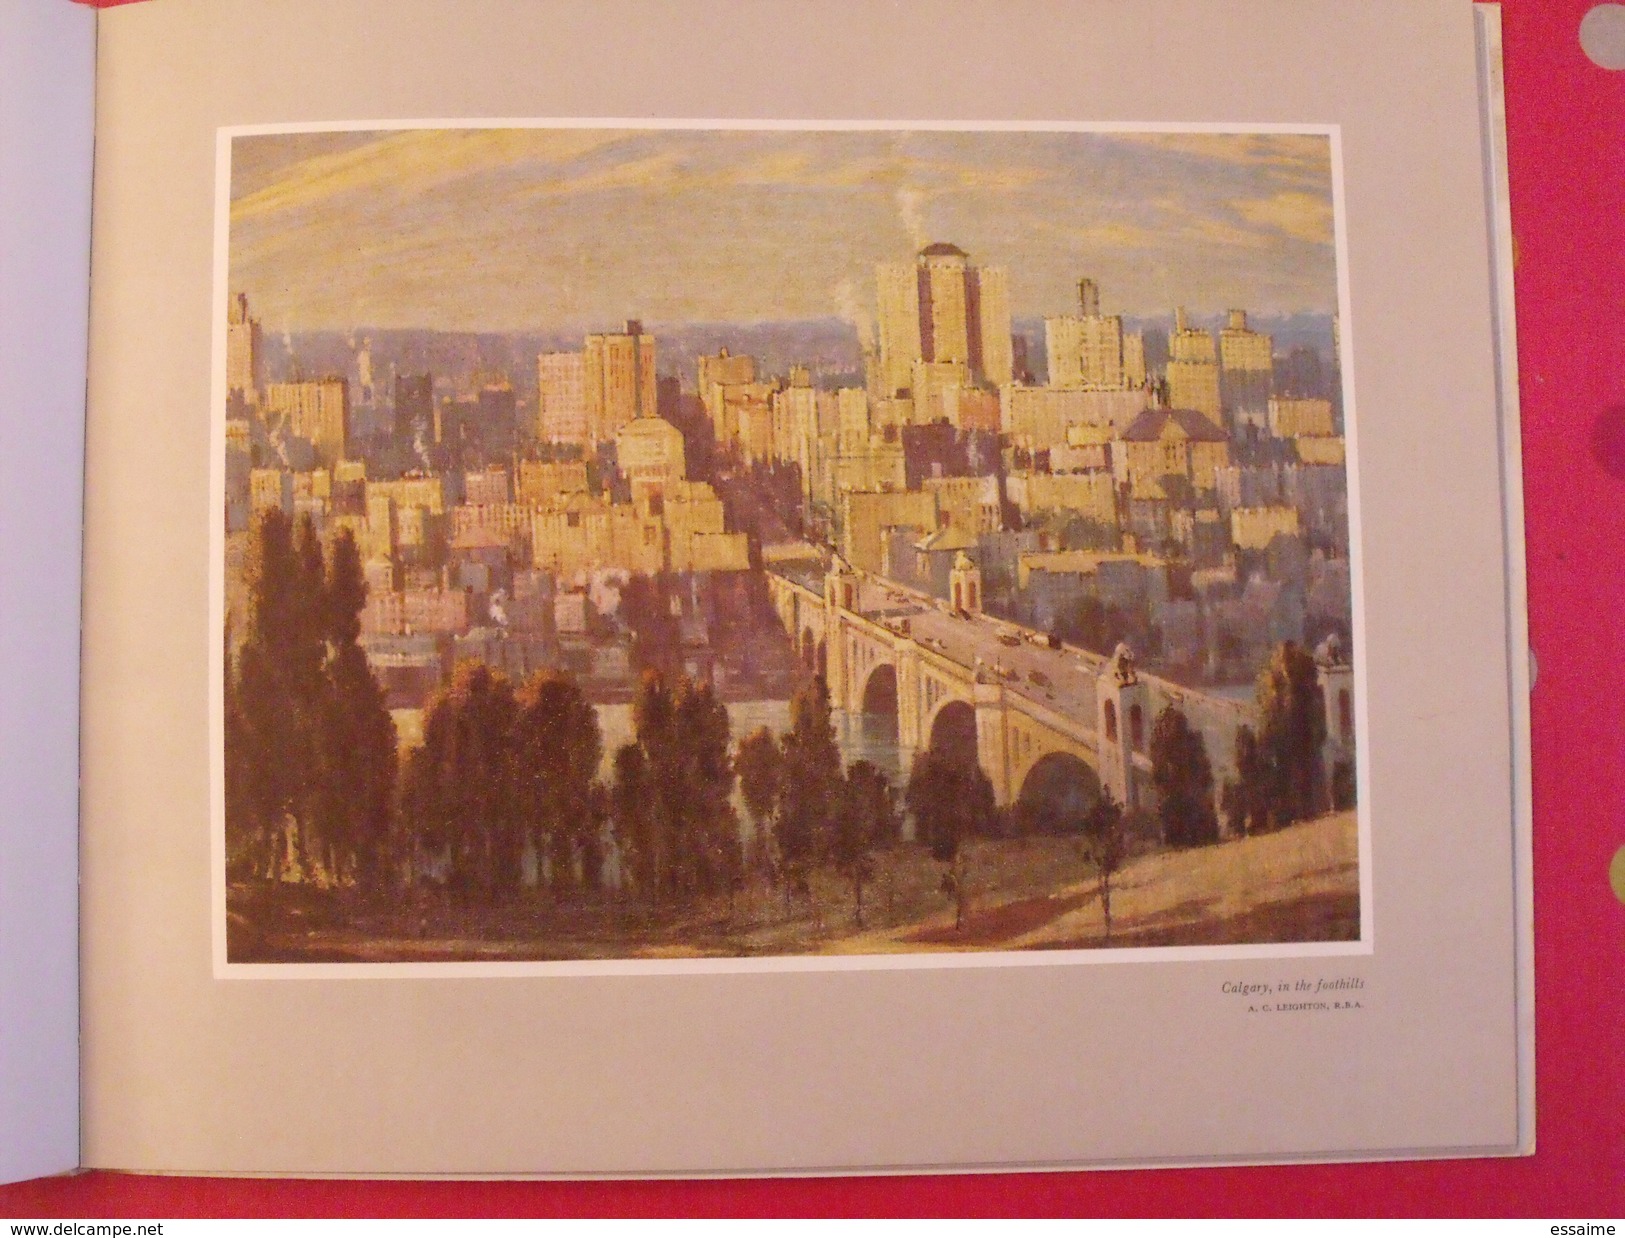 cities of Canada. 22 planches couleurs. peintures des villes. arbuckle hallam leighton bice... vers 1951. emboitage